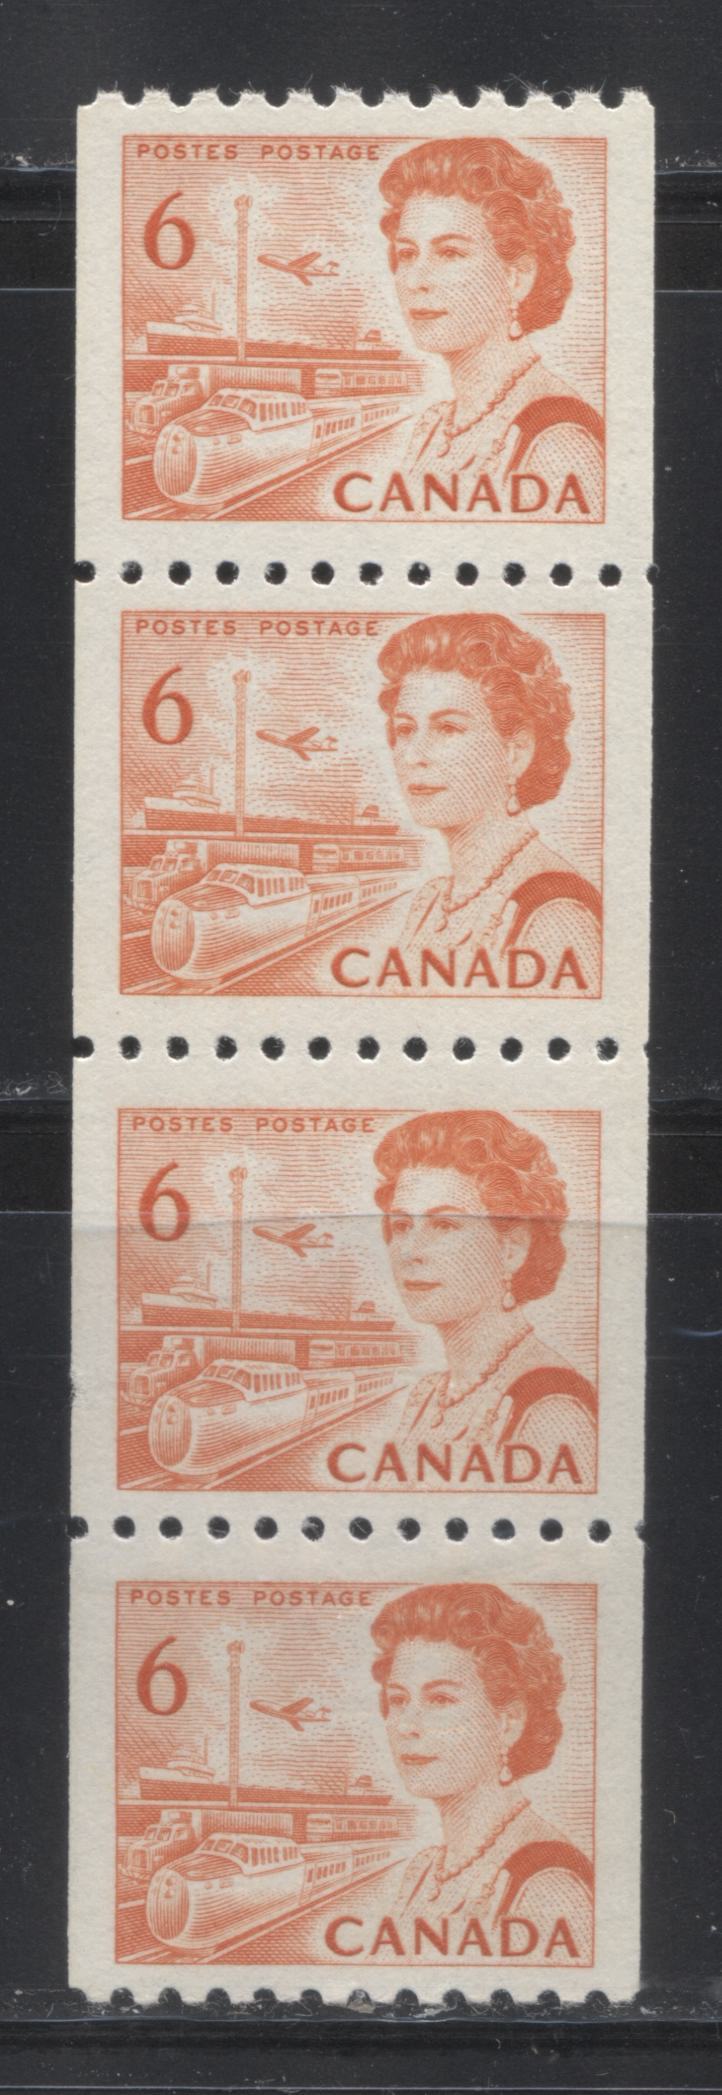 Lot 115 Canada #468A 6c Orange Transportation, 1967-1973 Centennial Definitive Issue, A VFNH Coil Strip Of 4 On NF Paper With Dex Gum, Wide Spacing